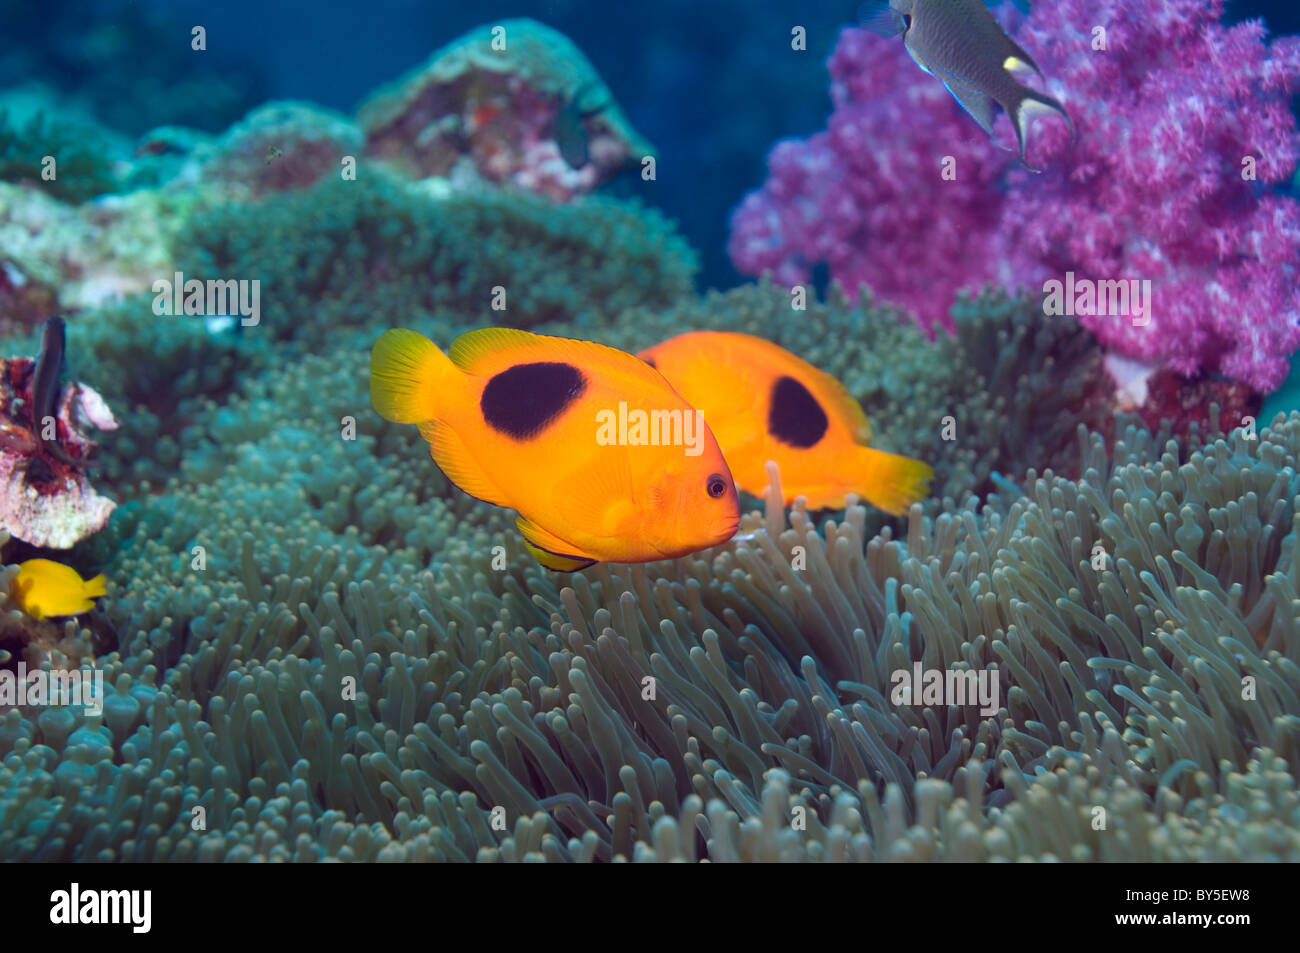 Red saddleback anemonefish (Amphiprion ephippium) with ahemone and soft corals. Andaman Sea, Thailand. Stock Photo